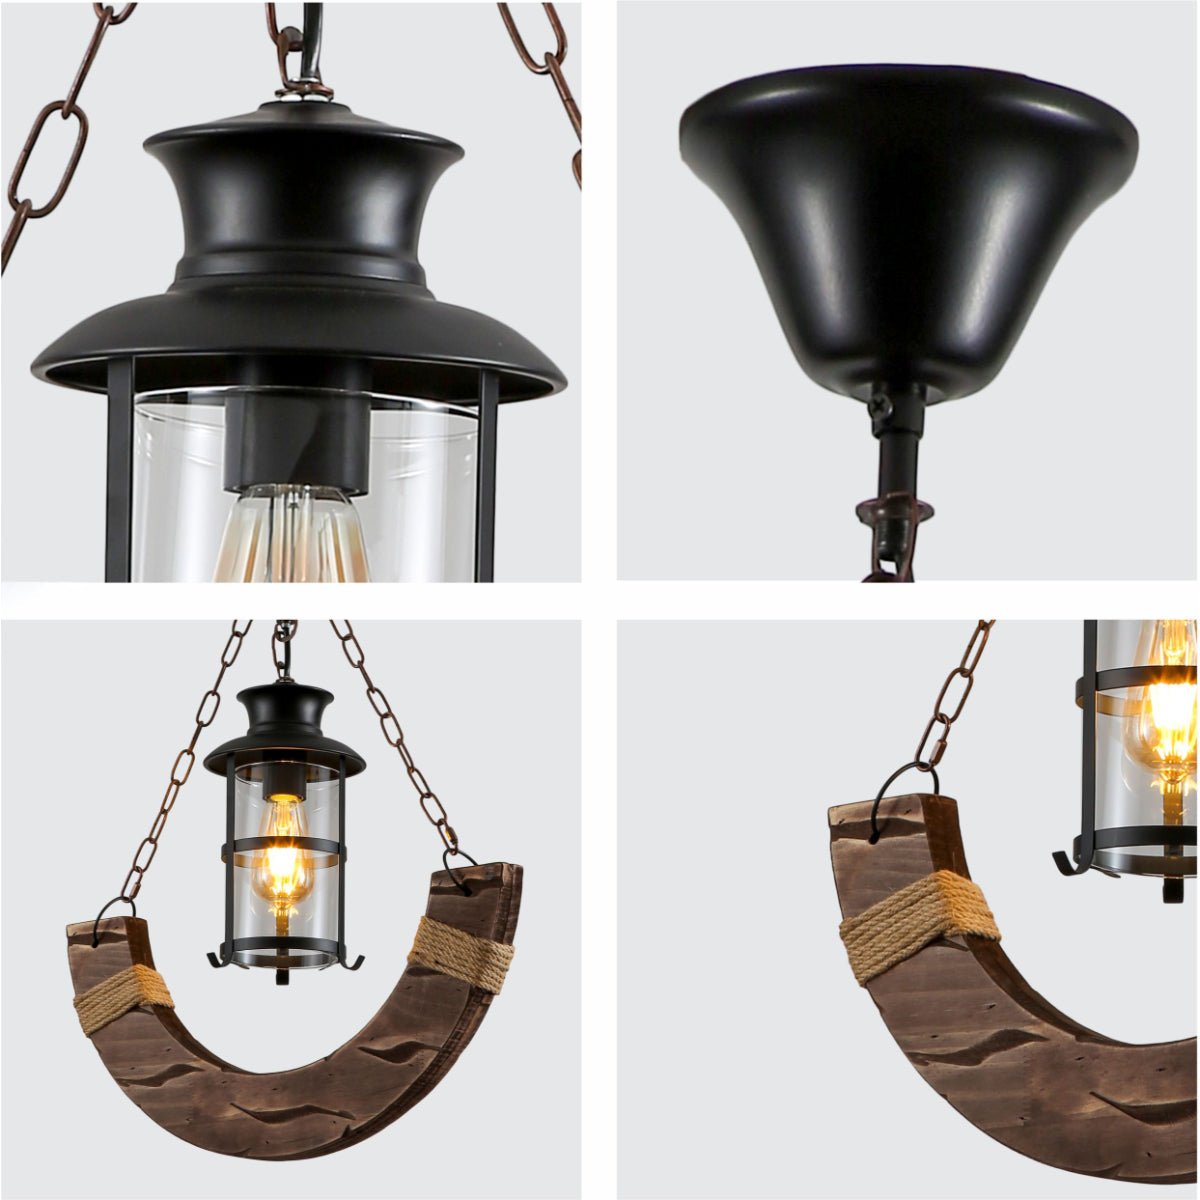 Detailed shots of Crescent Wood Glass Cylinder Shaded Rustic Farmhouse Nautical Pendant Ceiling Light E27 | TEKLED 159-17848